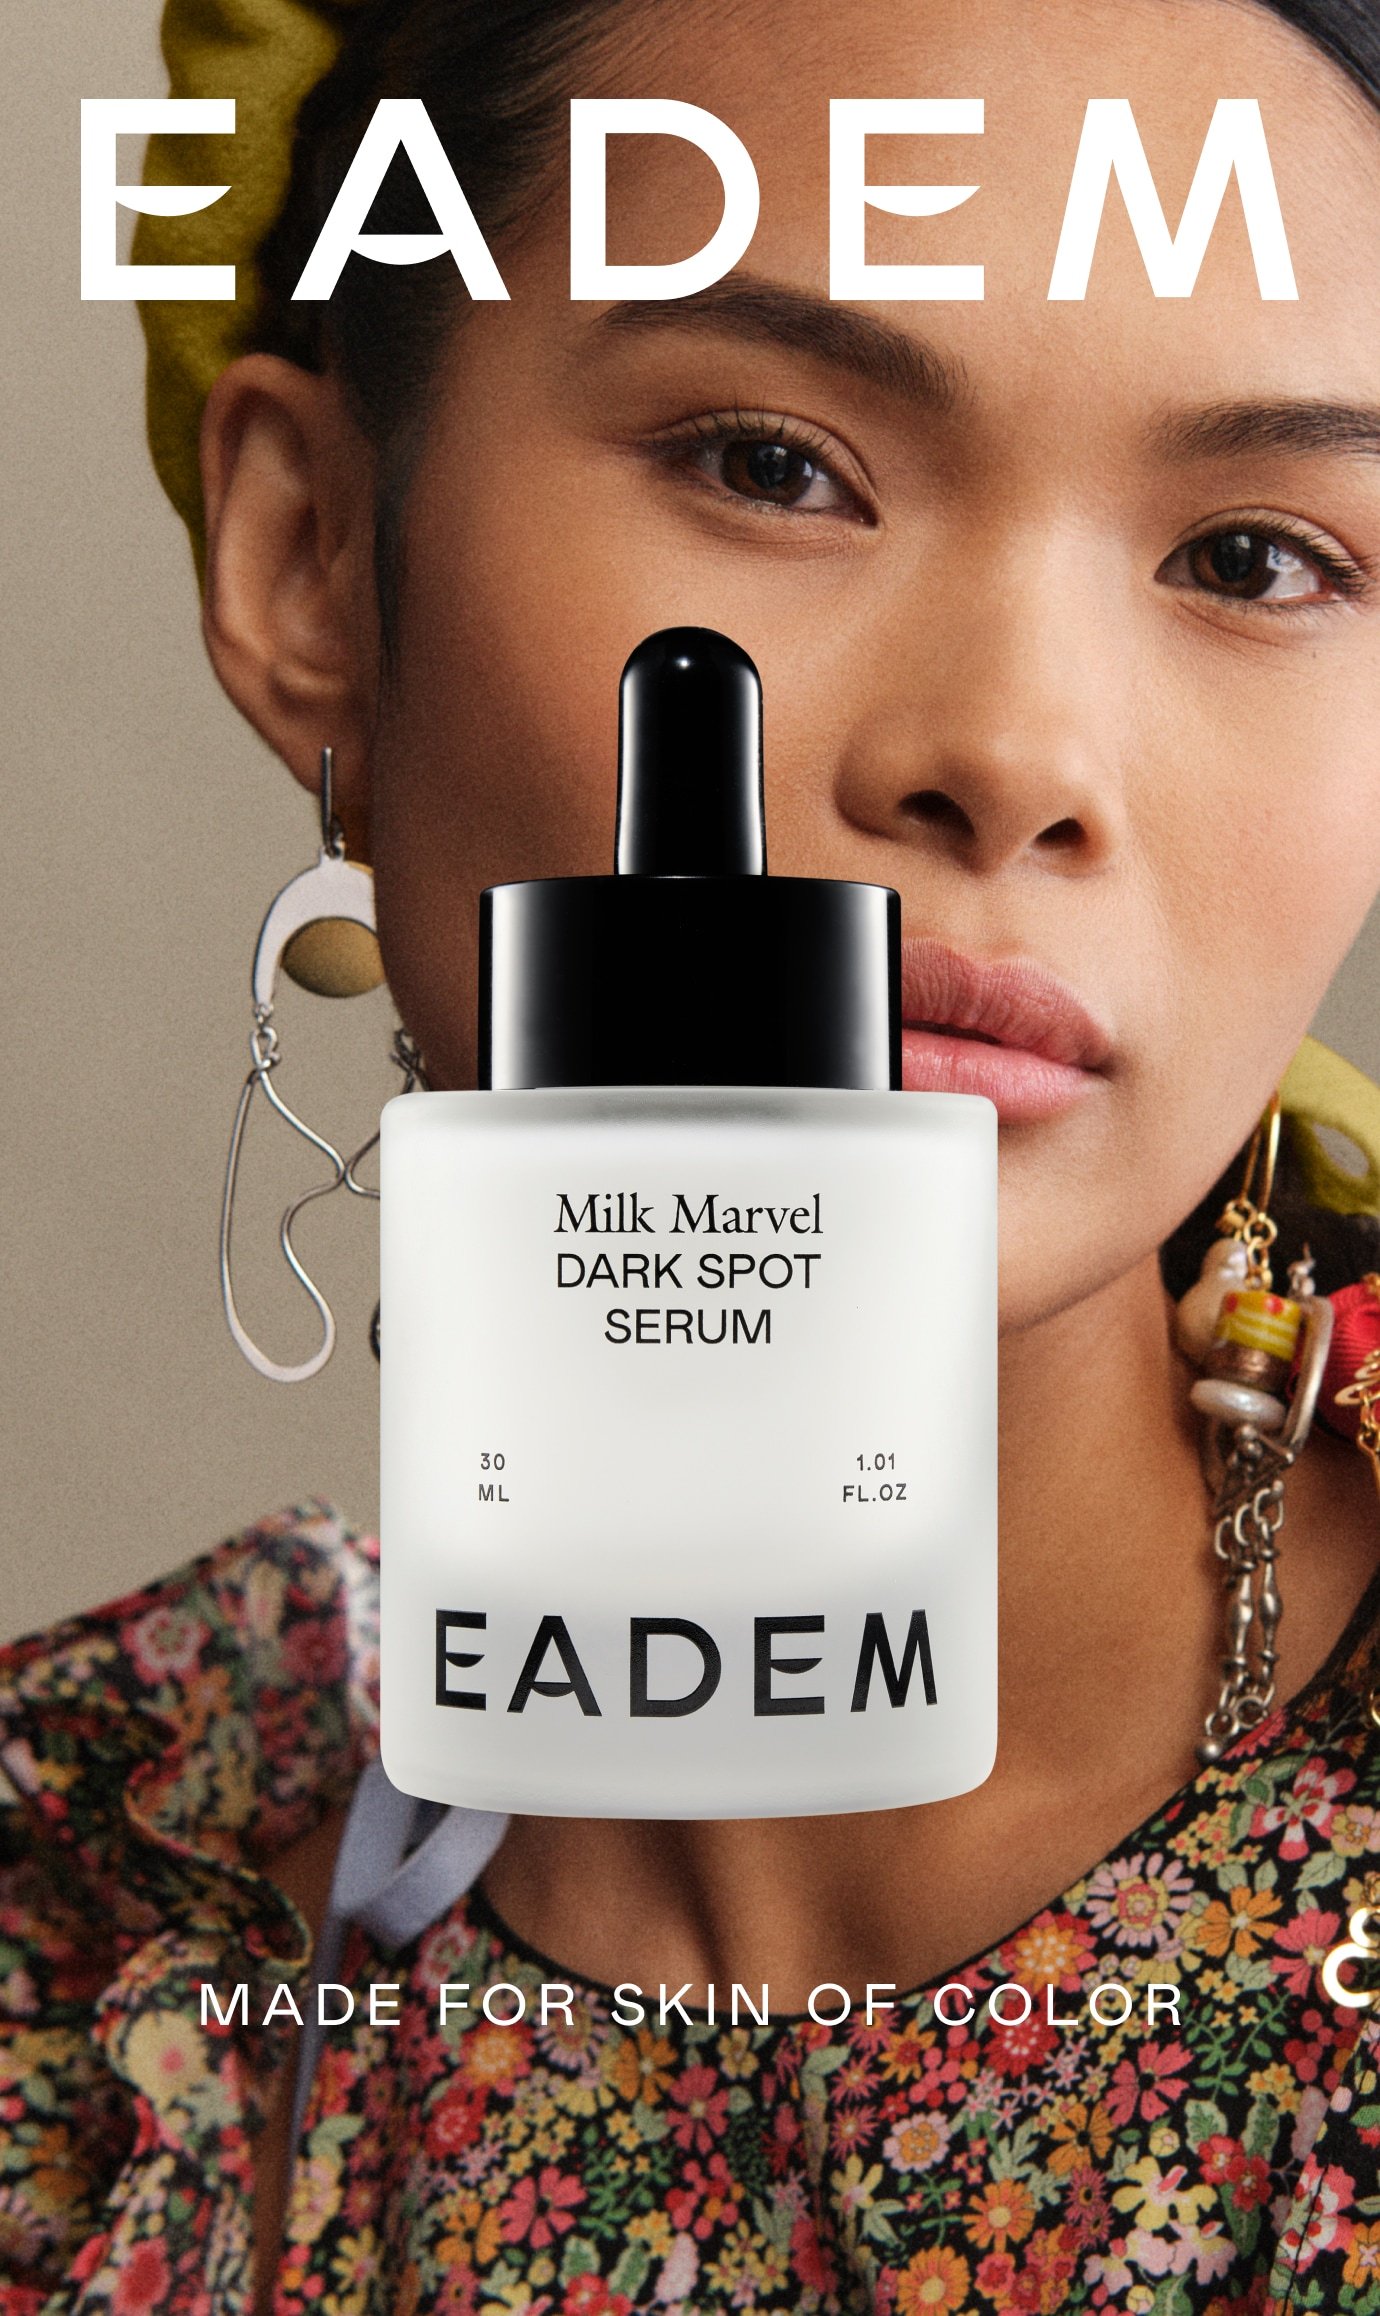 EADEM finally launched a new product - a moisturizer